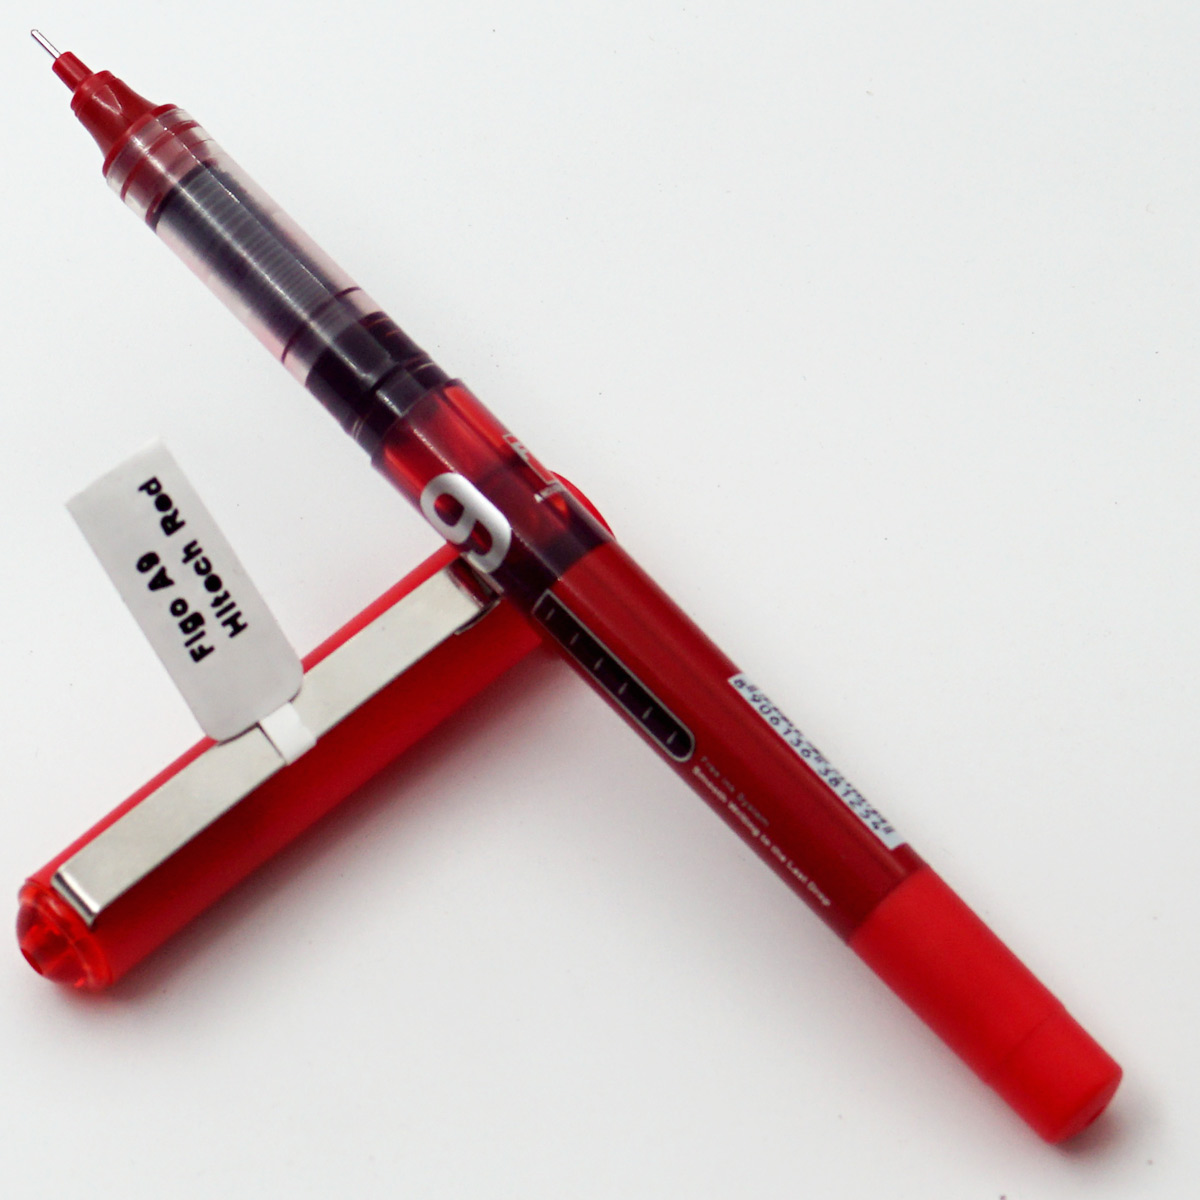 Figo A9 Hitech Red Color Body With Silver Clip 0.6mm Tip Red Writing Cap Type Gel Pen SKU24556